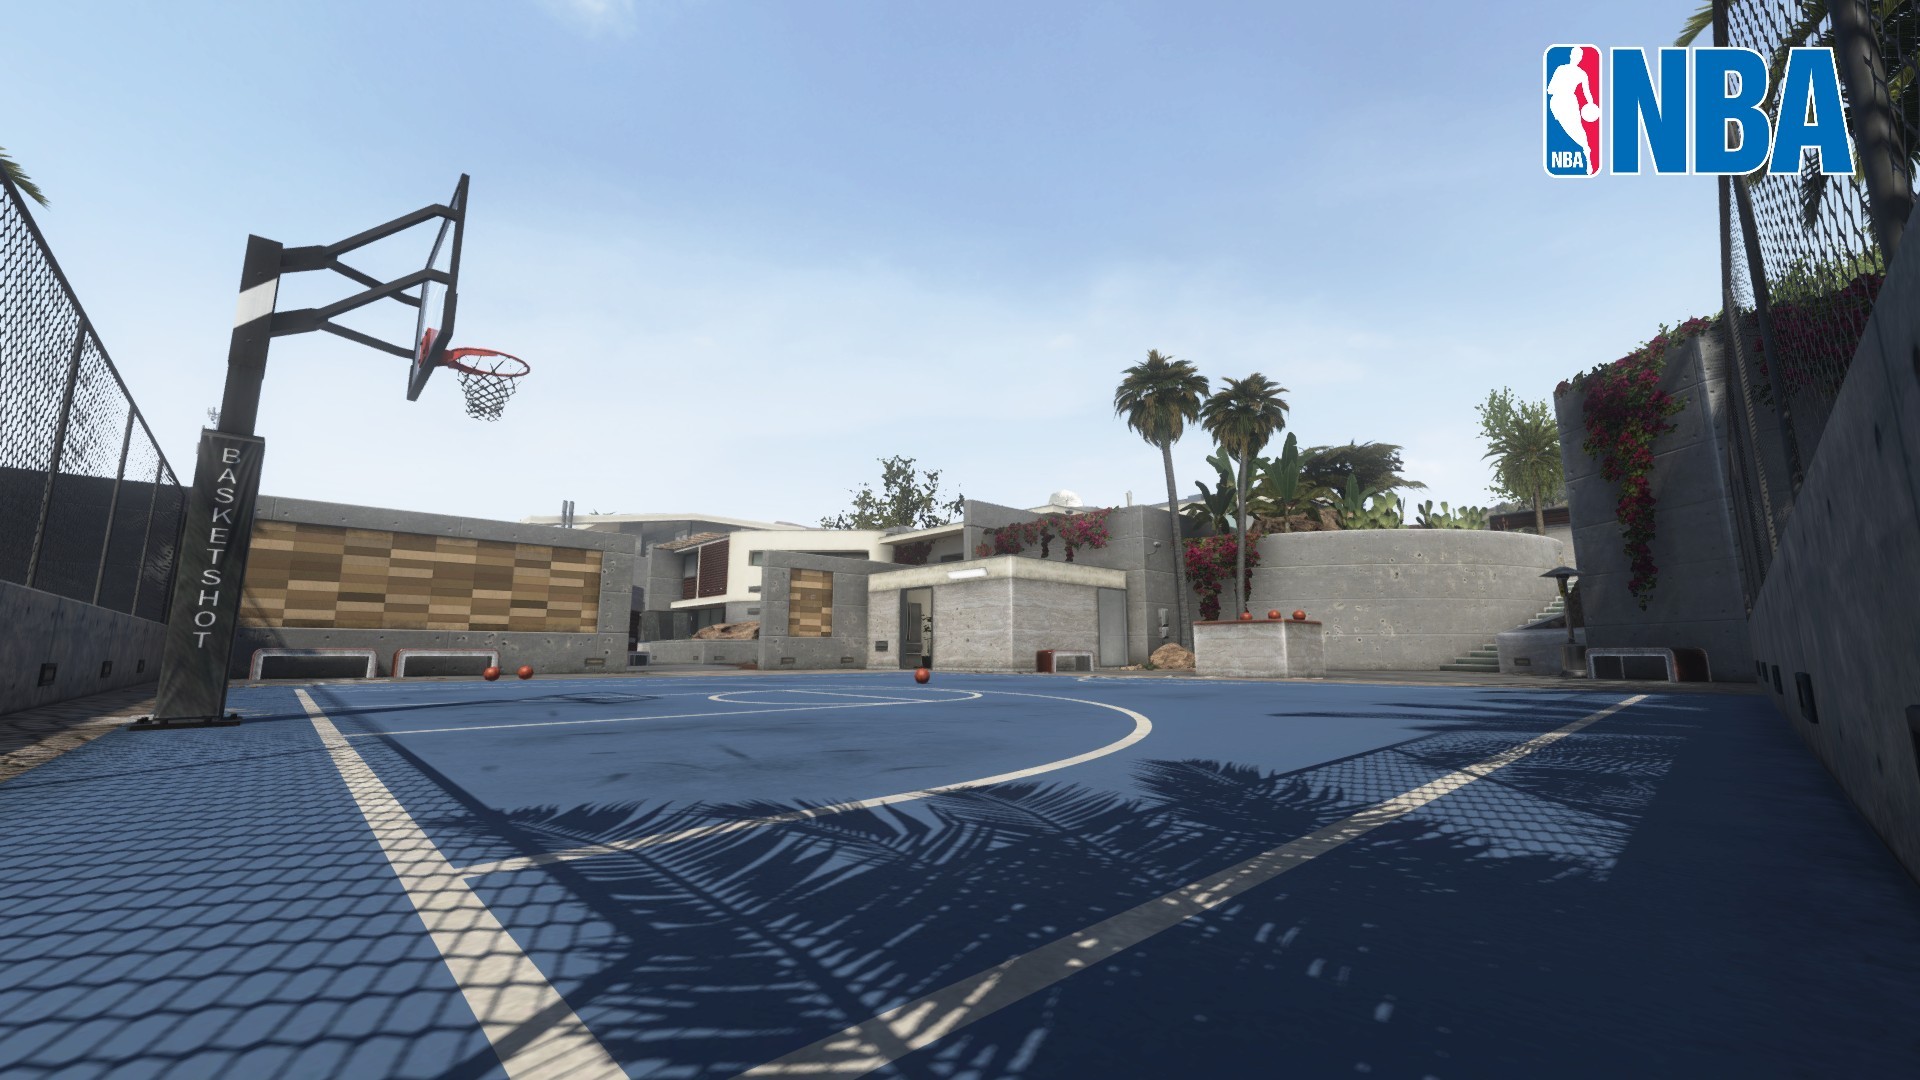 1920x1080 HD Basketball Court Wallpapers with image dimensions  pixel. You  can make this wallpaper for